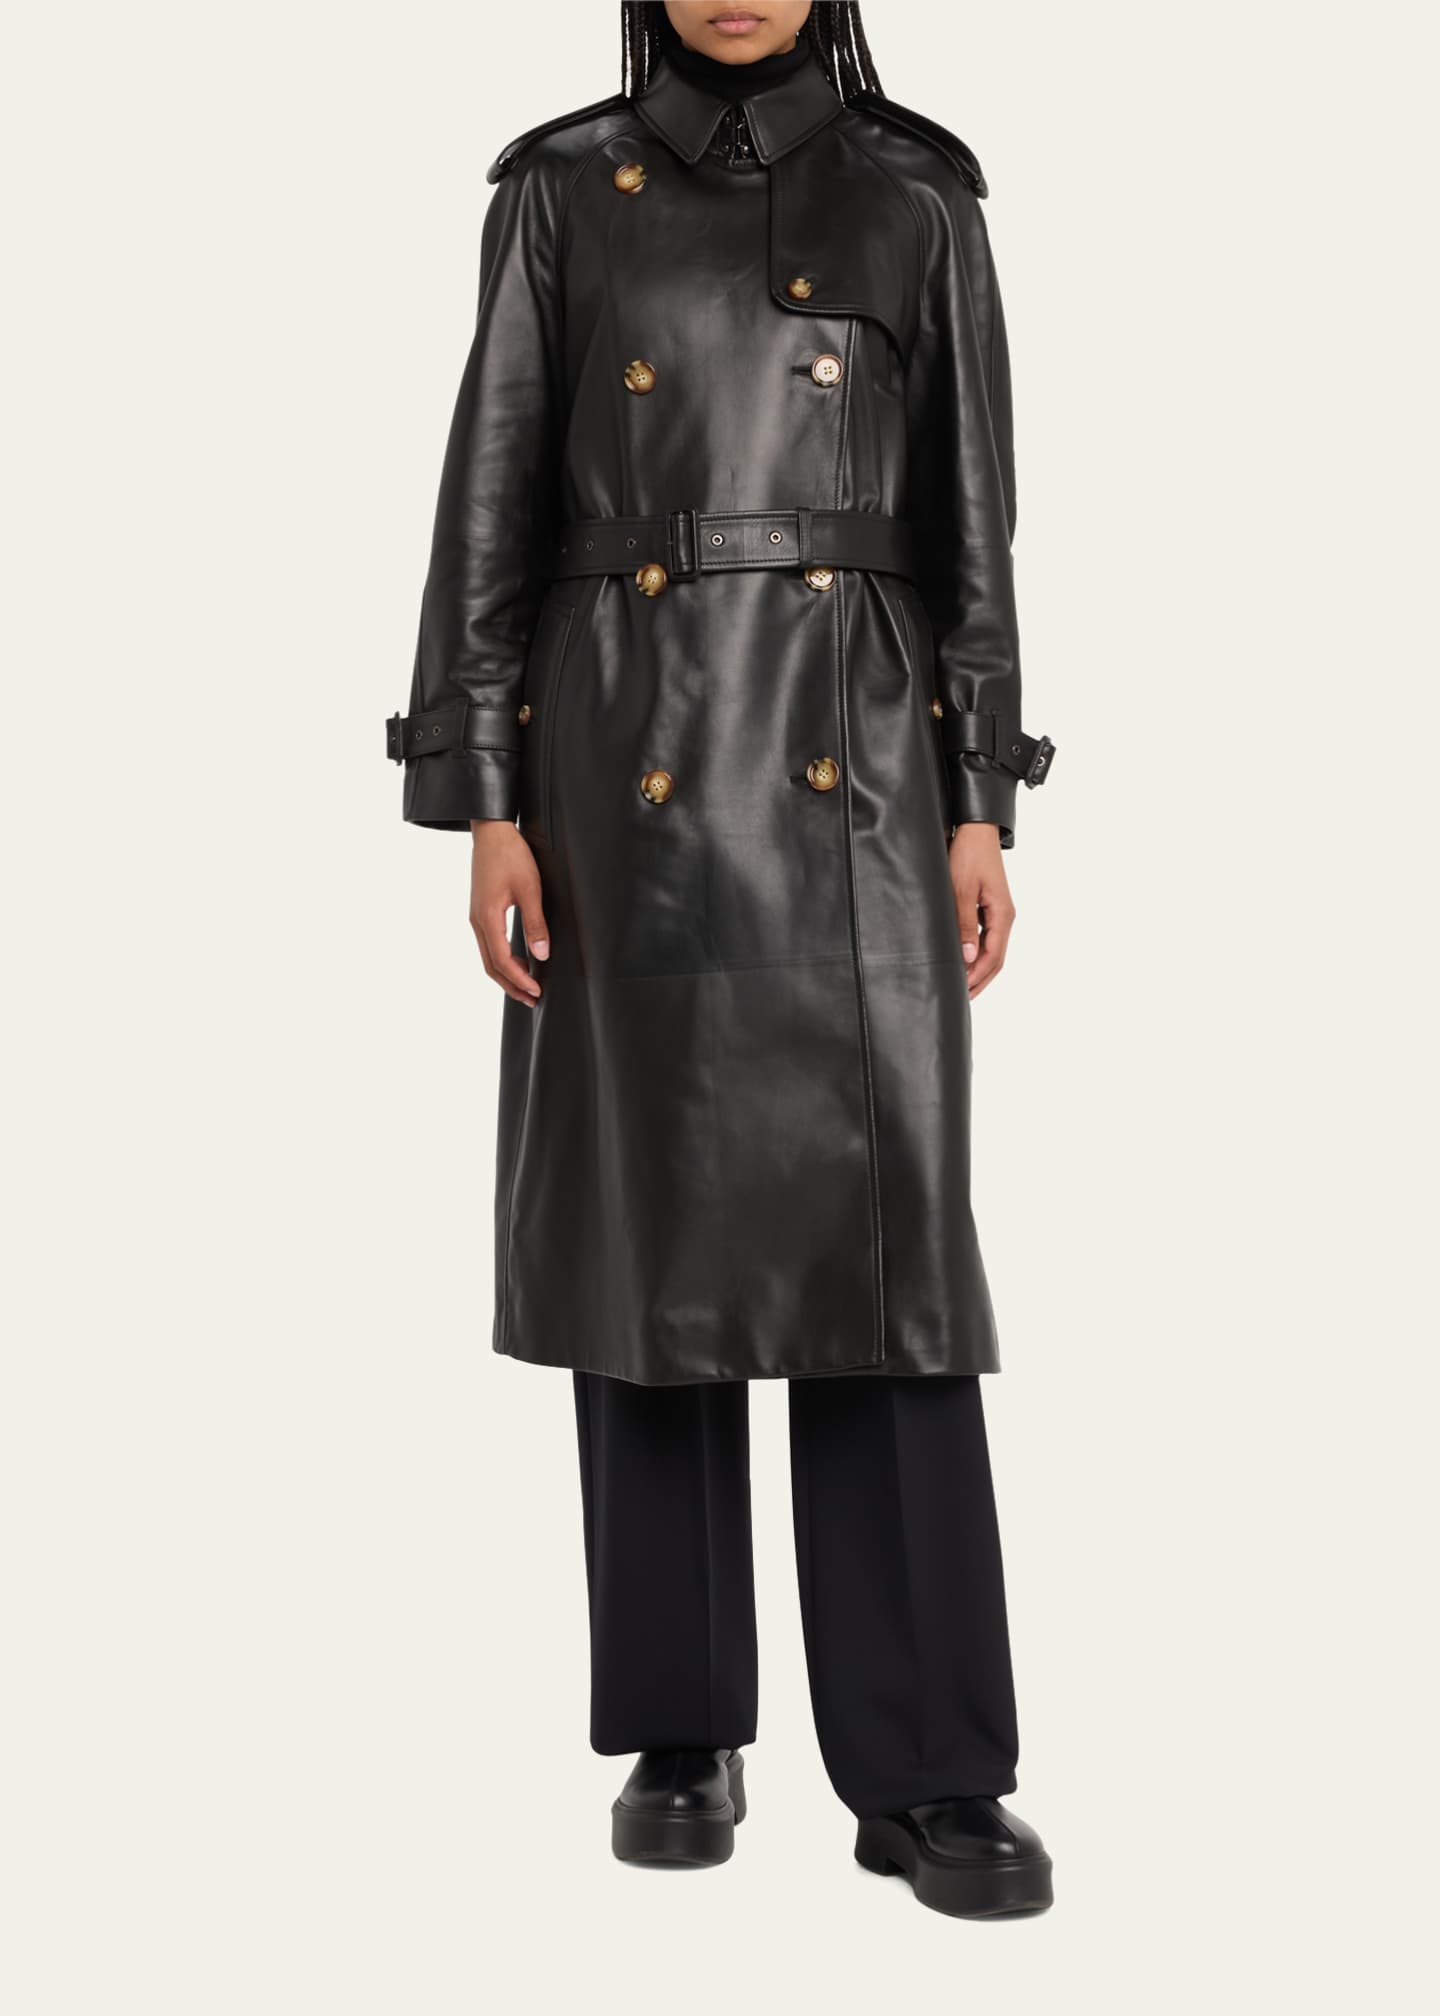 Burberry Harehope Belted Leather Trench Coat - Bergdorf Goodman